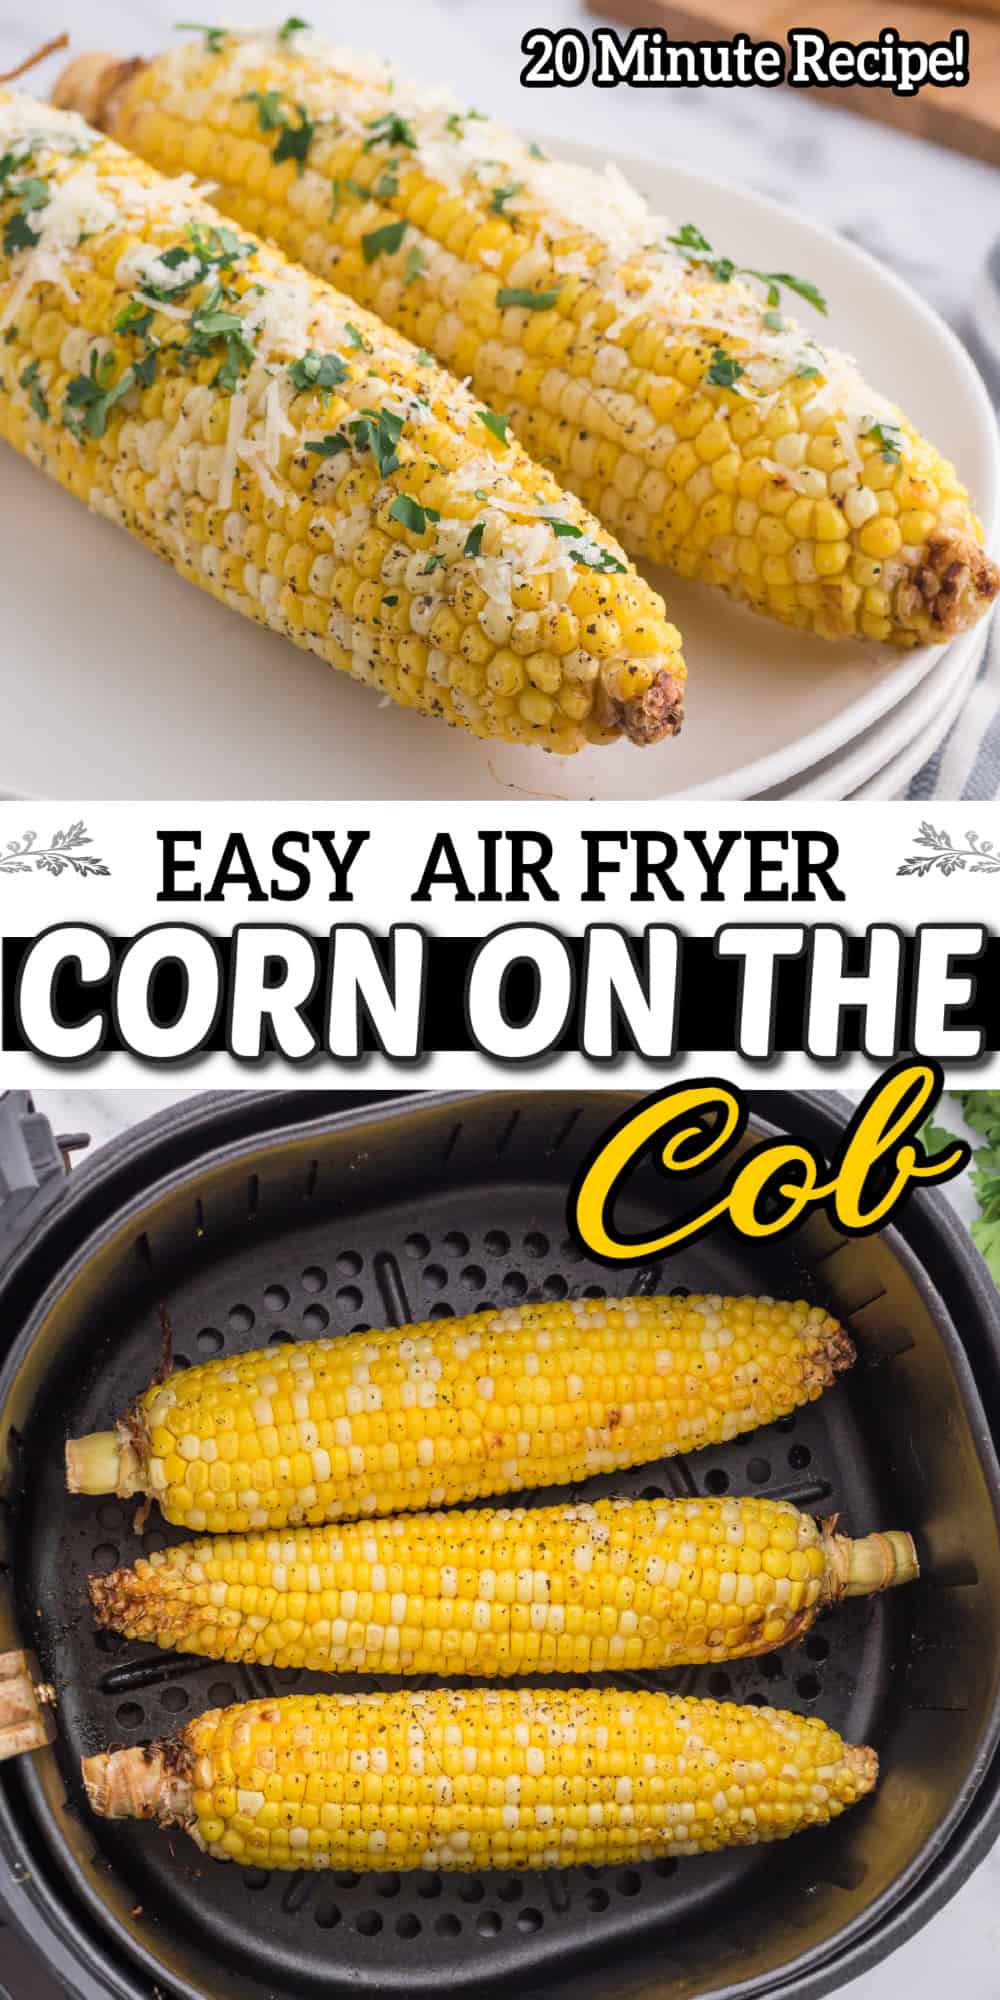 corn on the cob with text